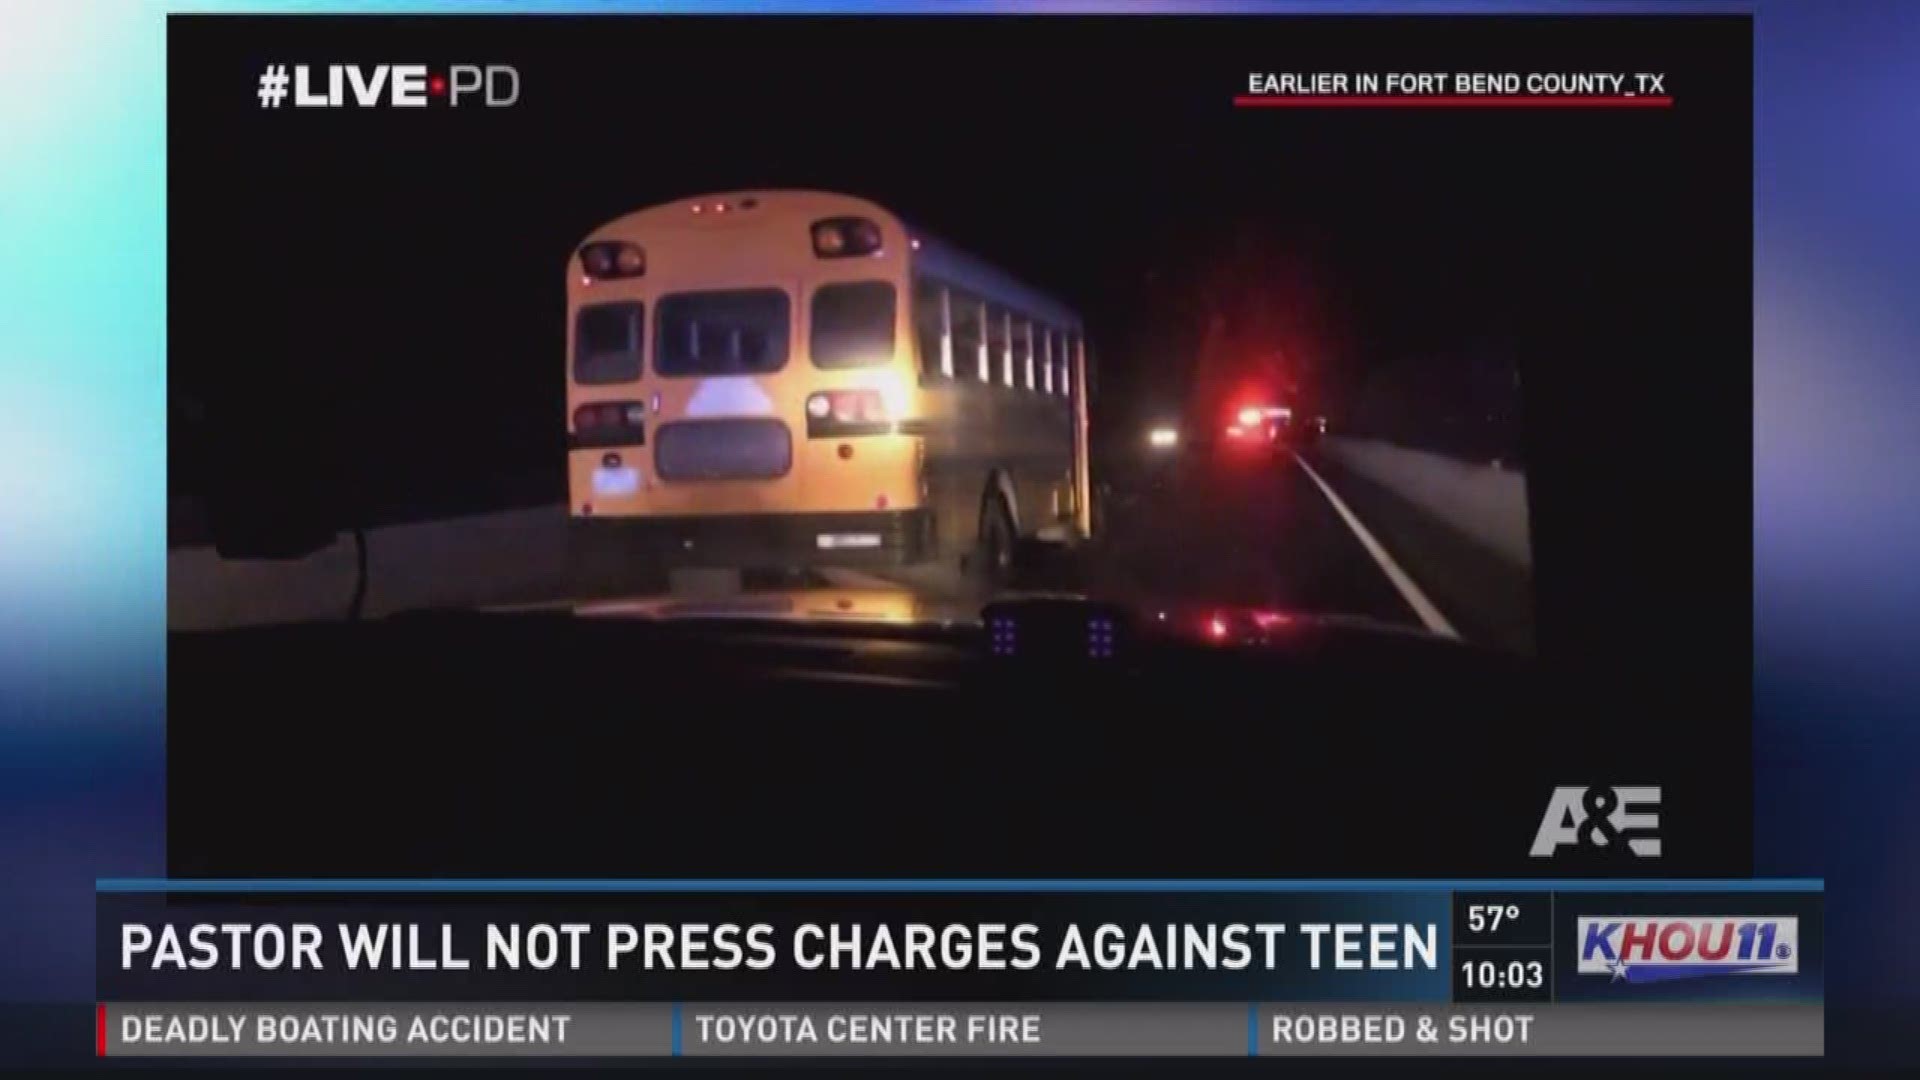 The pastor of the church who's bus was stolen by a teenager and taken on a wild police chase says he forgives the 15 year old and won't be pressing charges. 